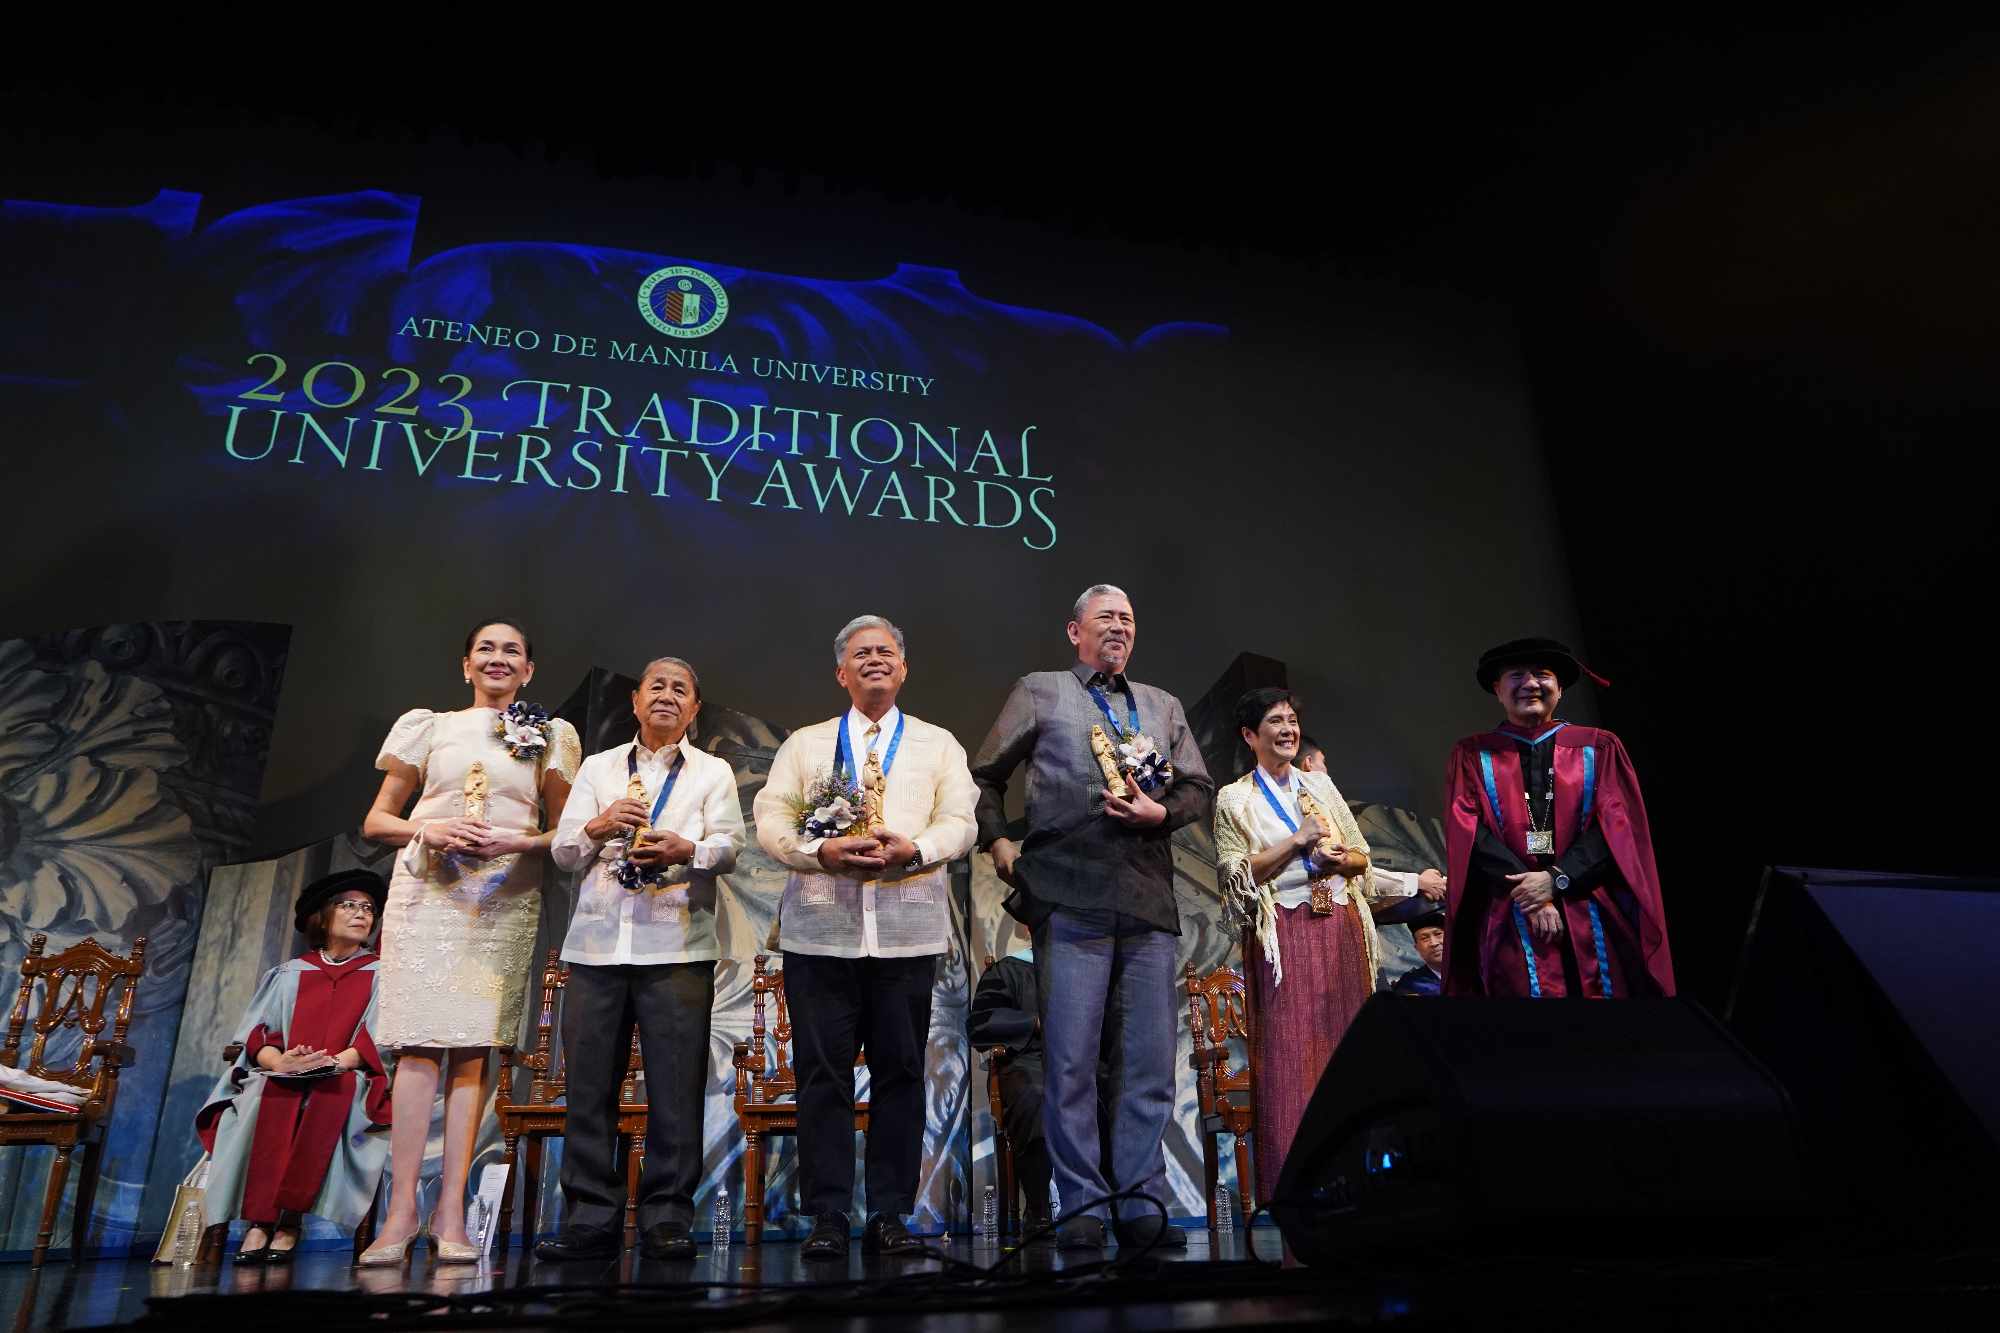 The awardees with Fr Roberto C Yap SJ onstage